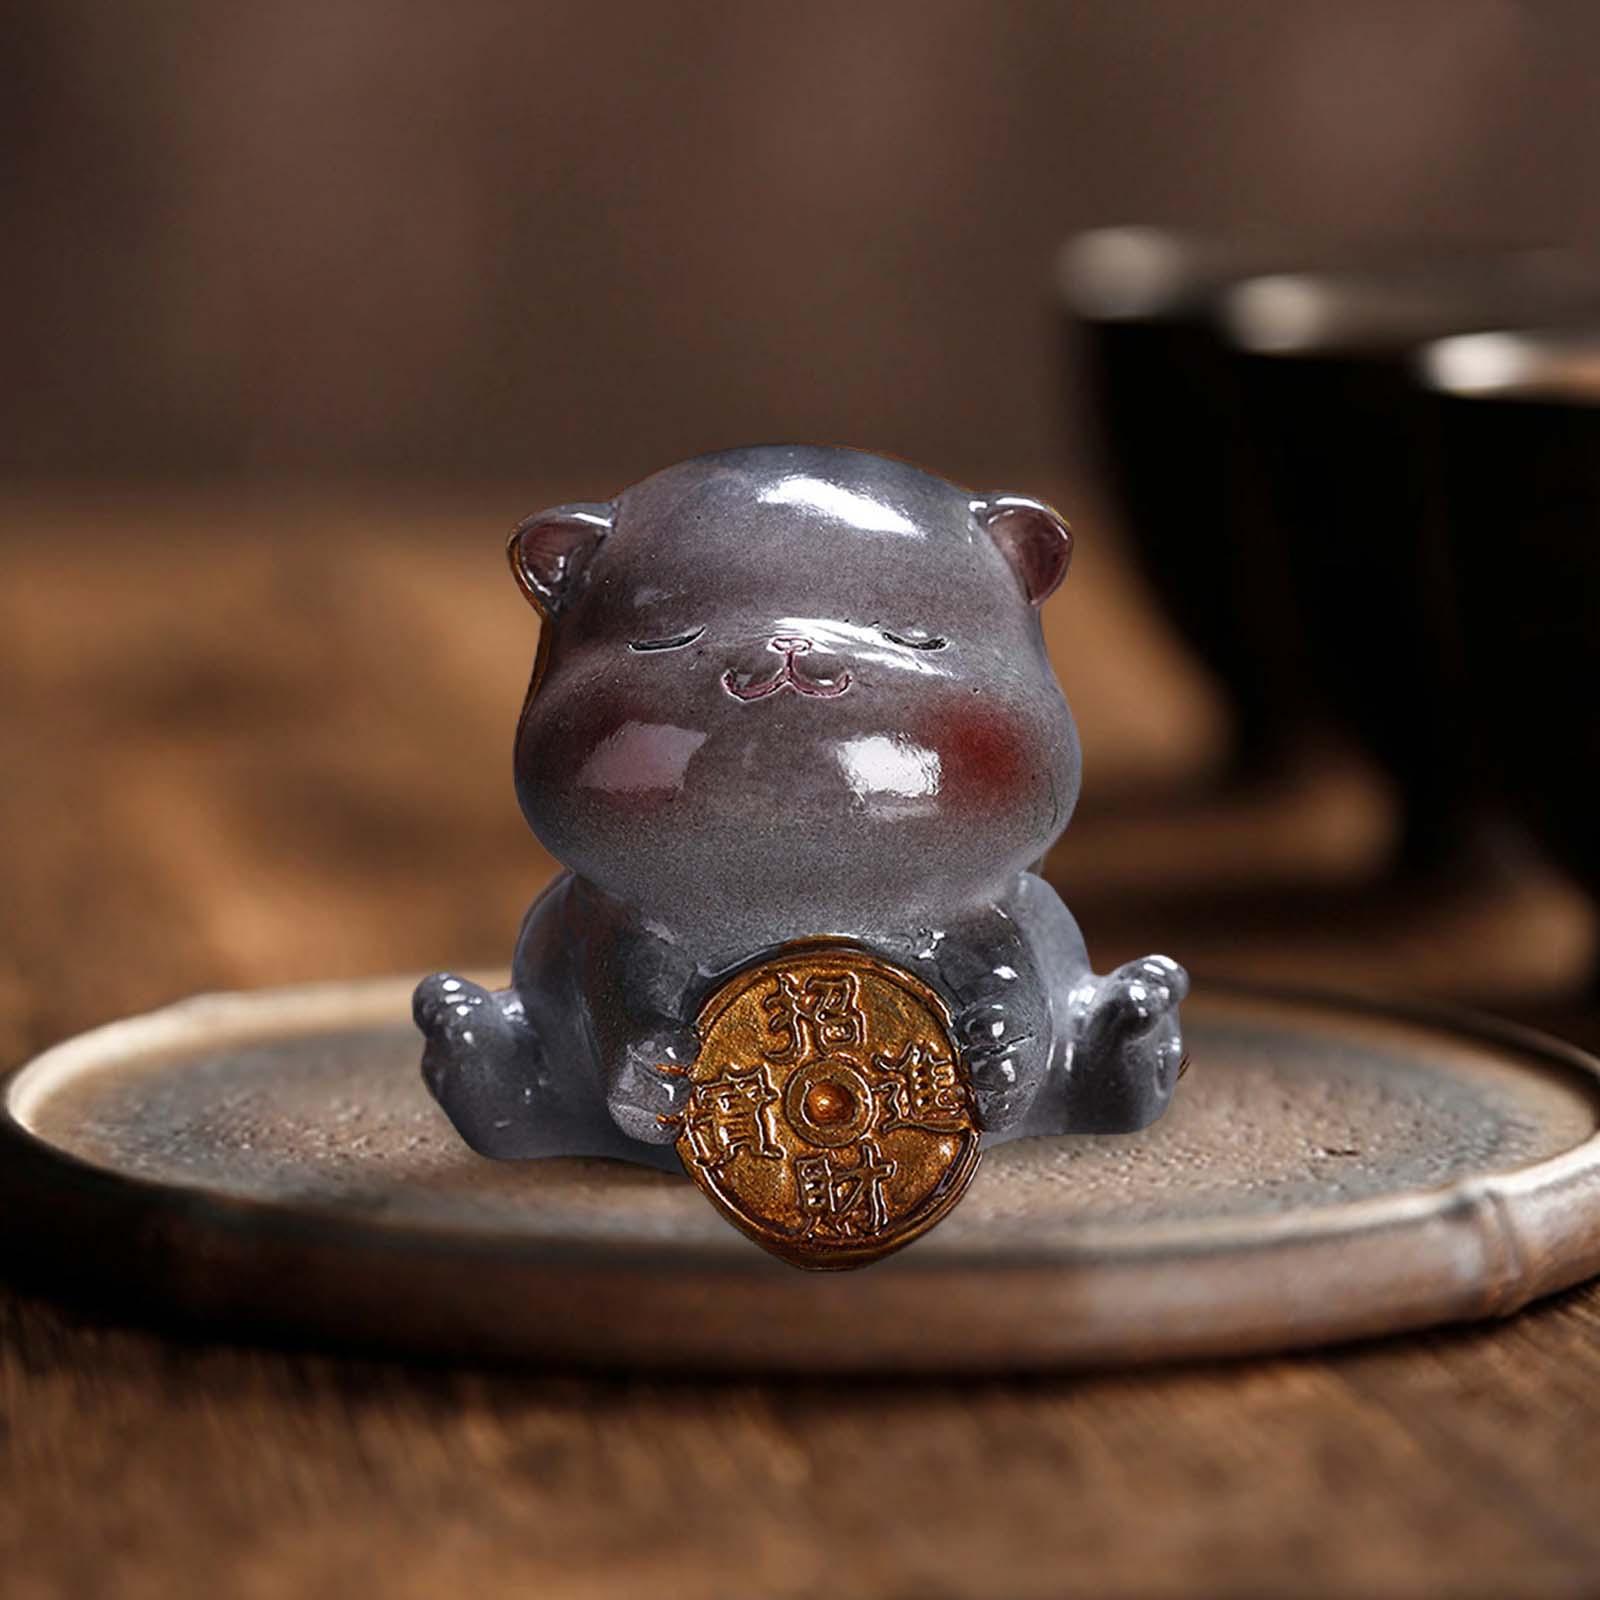 Tea Pet Cat Resin Crafts Cute Kitten Animal Sculpture for Bookcase Table Car Style B